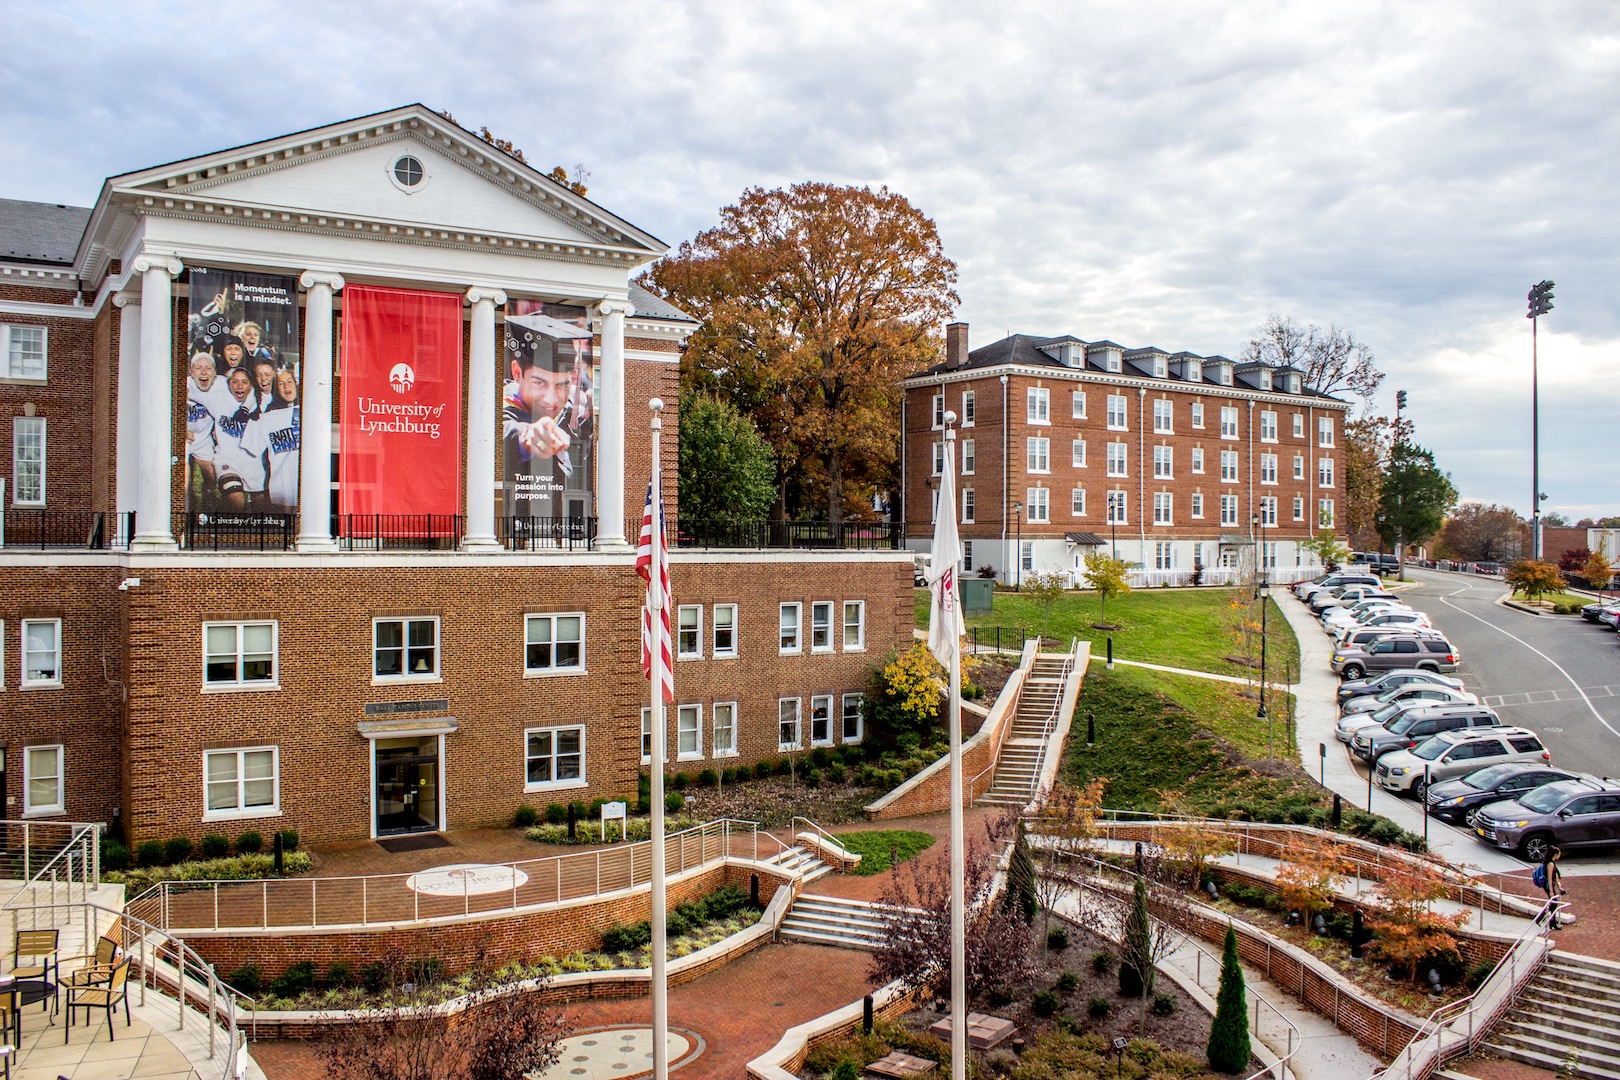 Presidents of Lynchburg universities share their respect for one